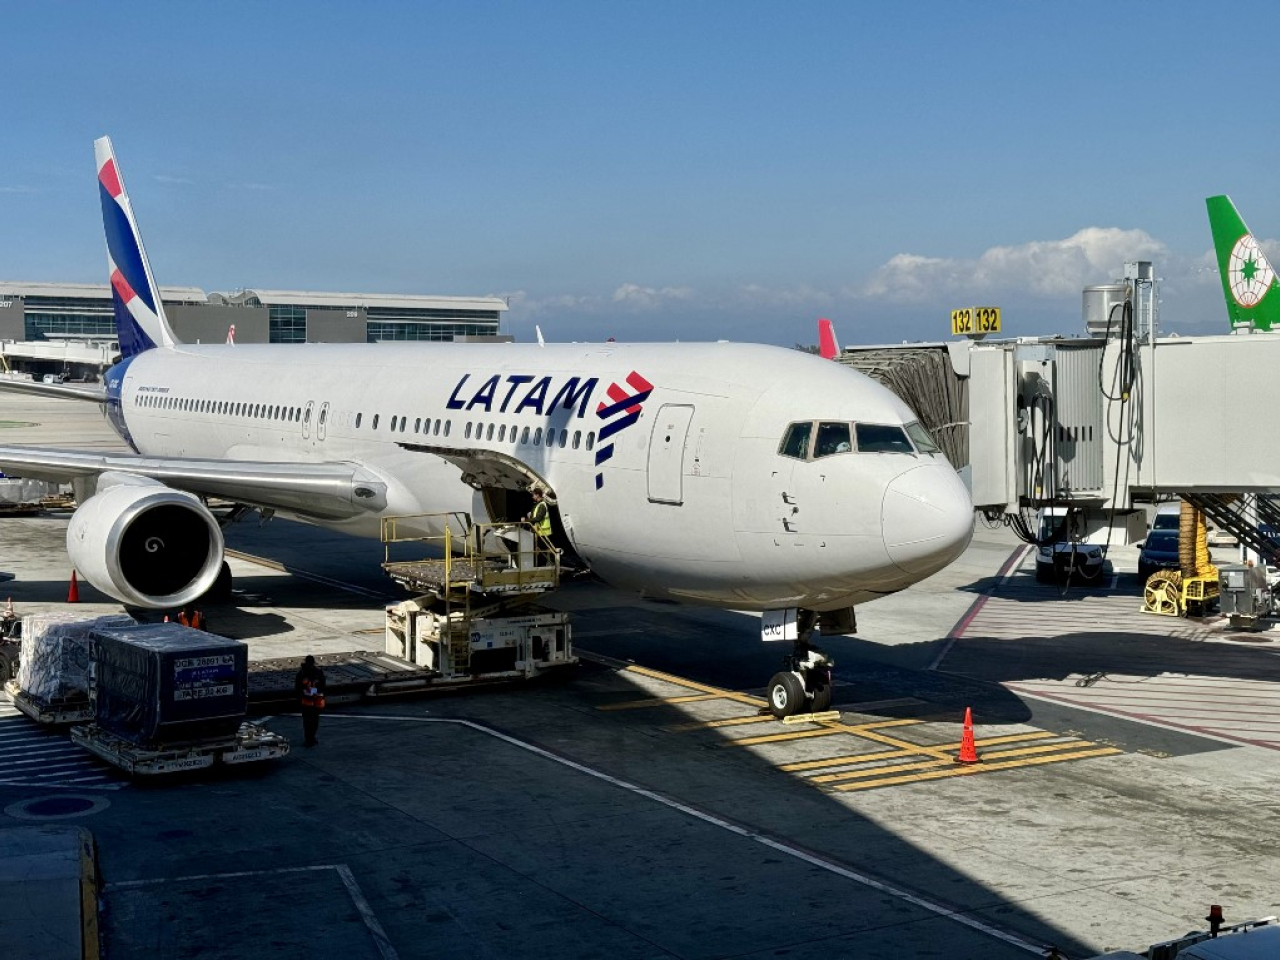 Latam flight: 12 treated after ‘technical’ issue mid-air